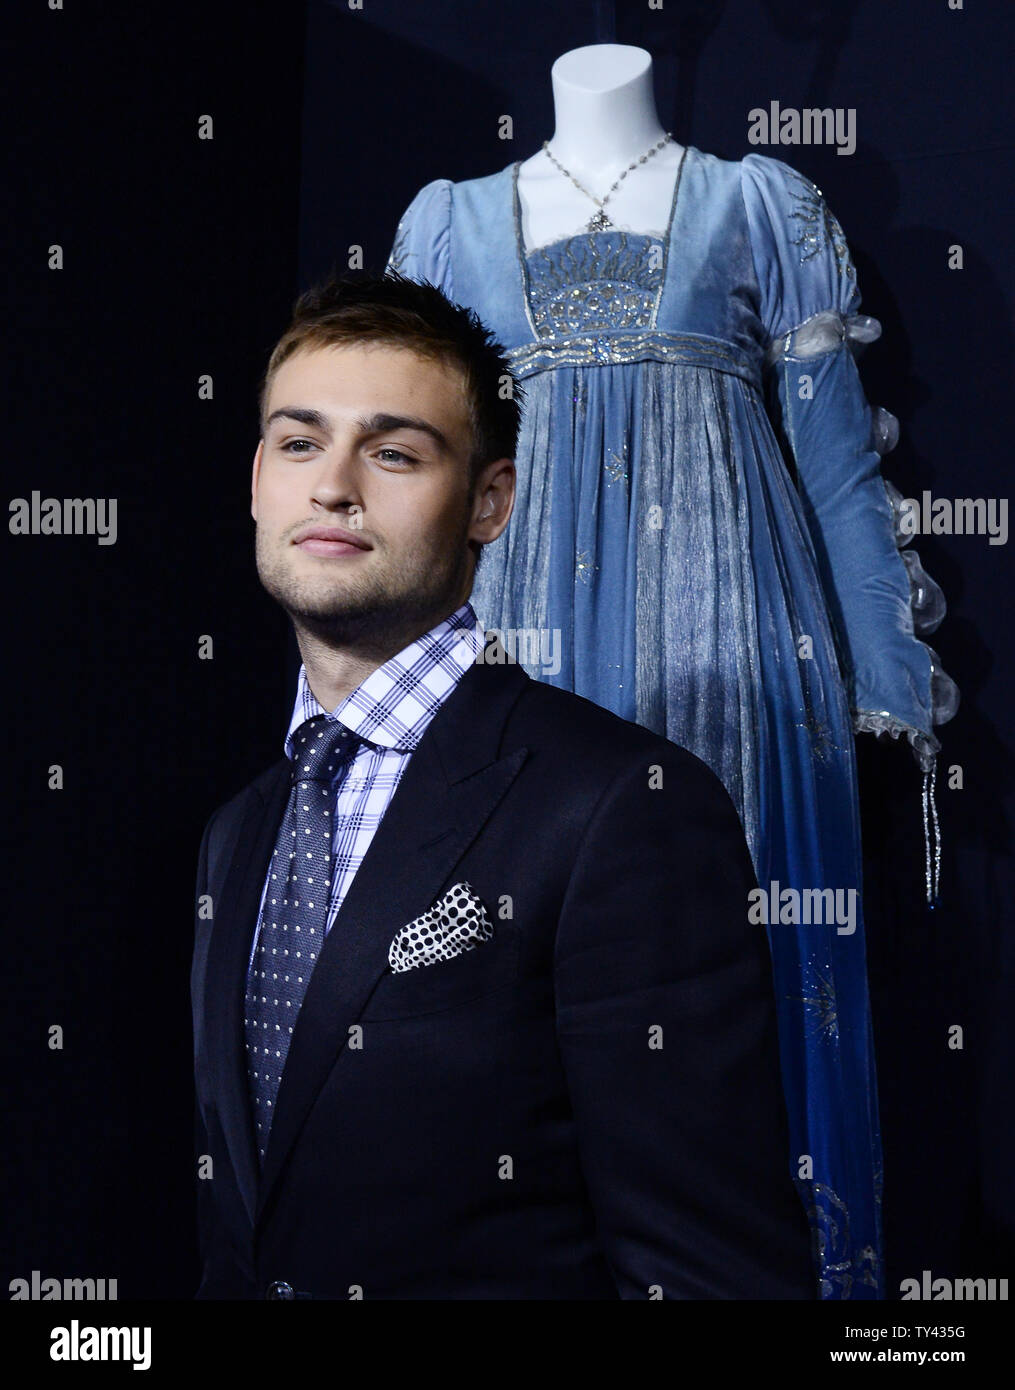 Cast member Douglas Booth attends the premiere of the motion picture romantic drama 'Romeo and Juliet' at the ArcLight Cinerama Dome in the Hollywood section of Los Angeles on September 24, 2013. The film is based on William Shakespeare's tragedy about two young star-crossed lovers whose deaths ultimately reconcile their feuding families.  UPI/Jim Ruymen Stock Photo